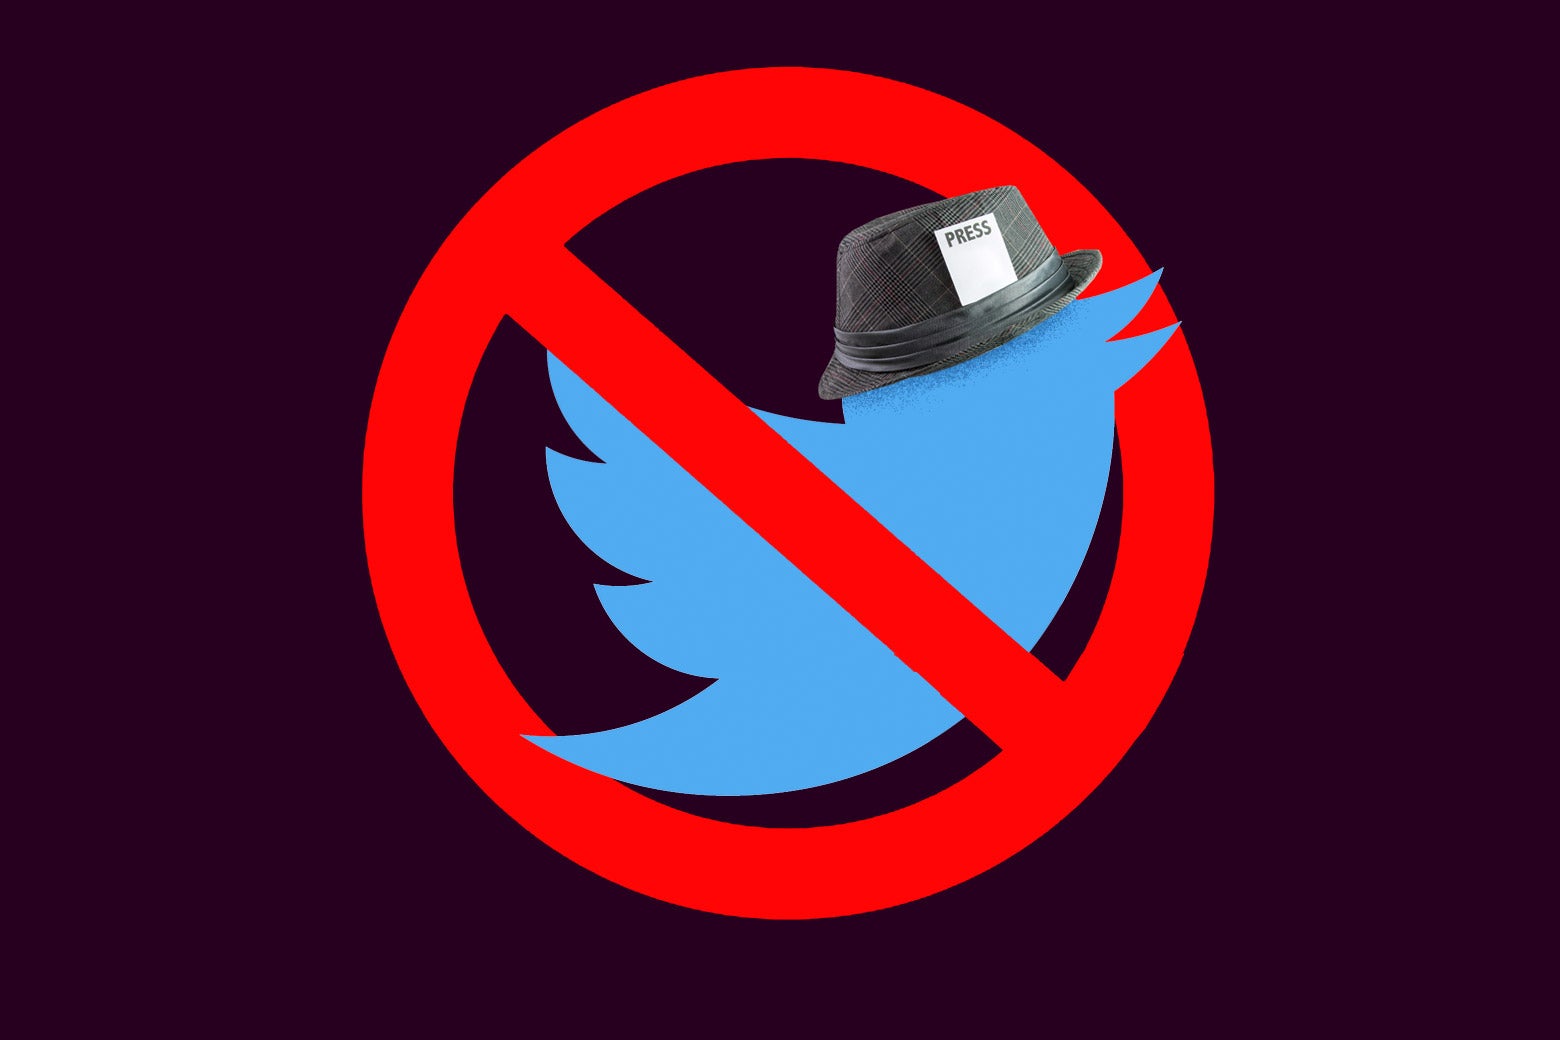 Twitter bird wearing a fedora that has a "PRESS" card in the hatband, overlaid with the no symbol.